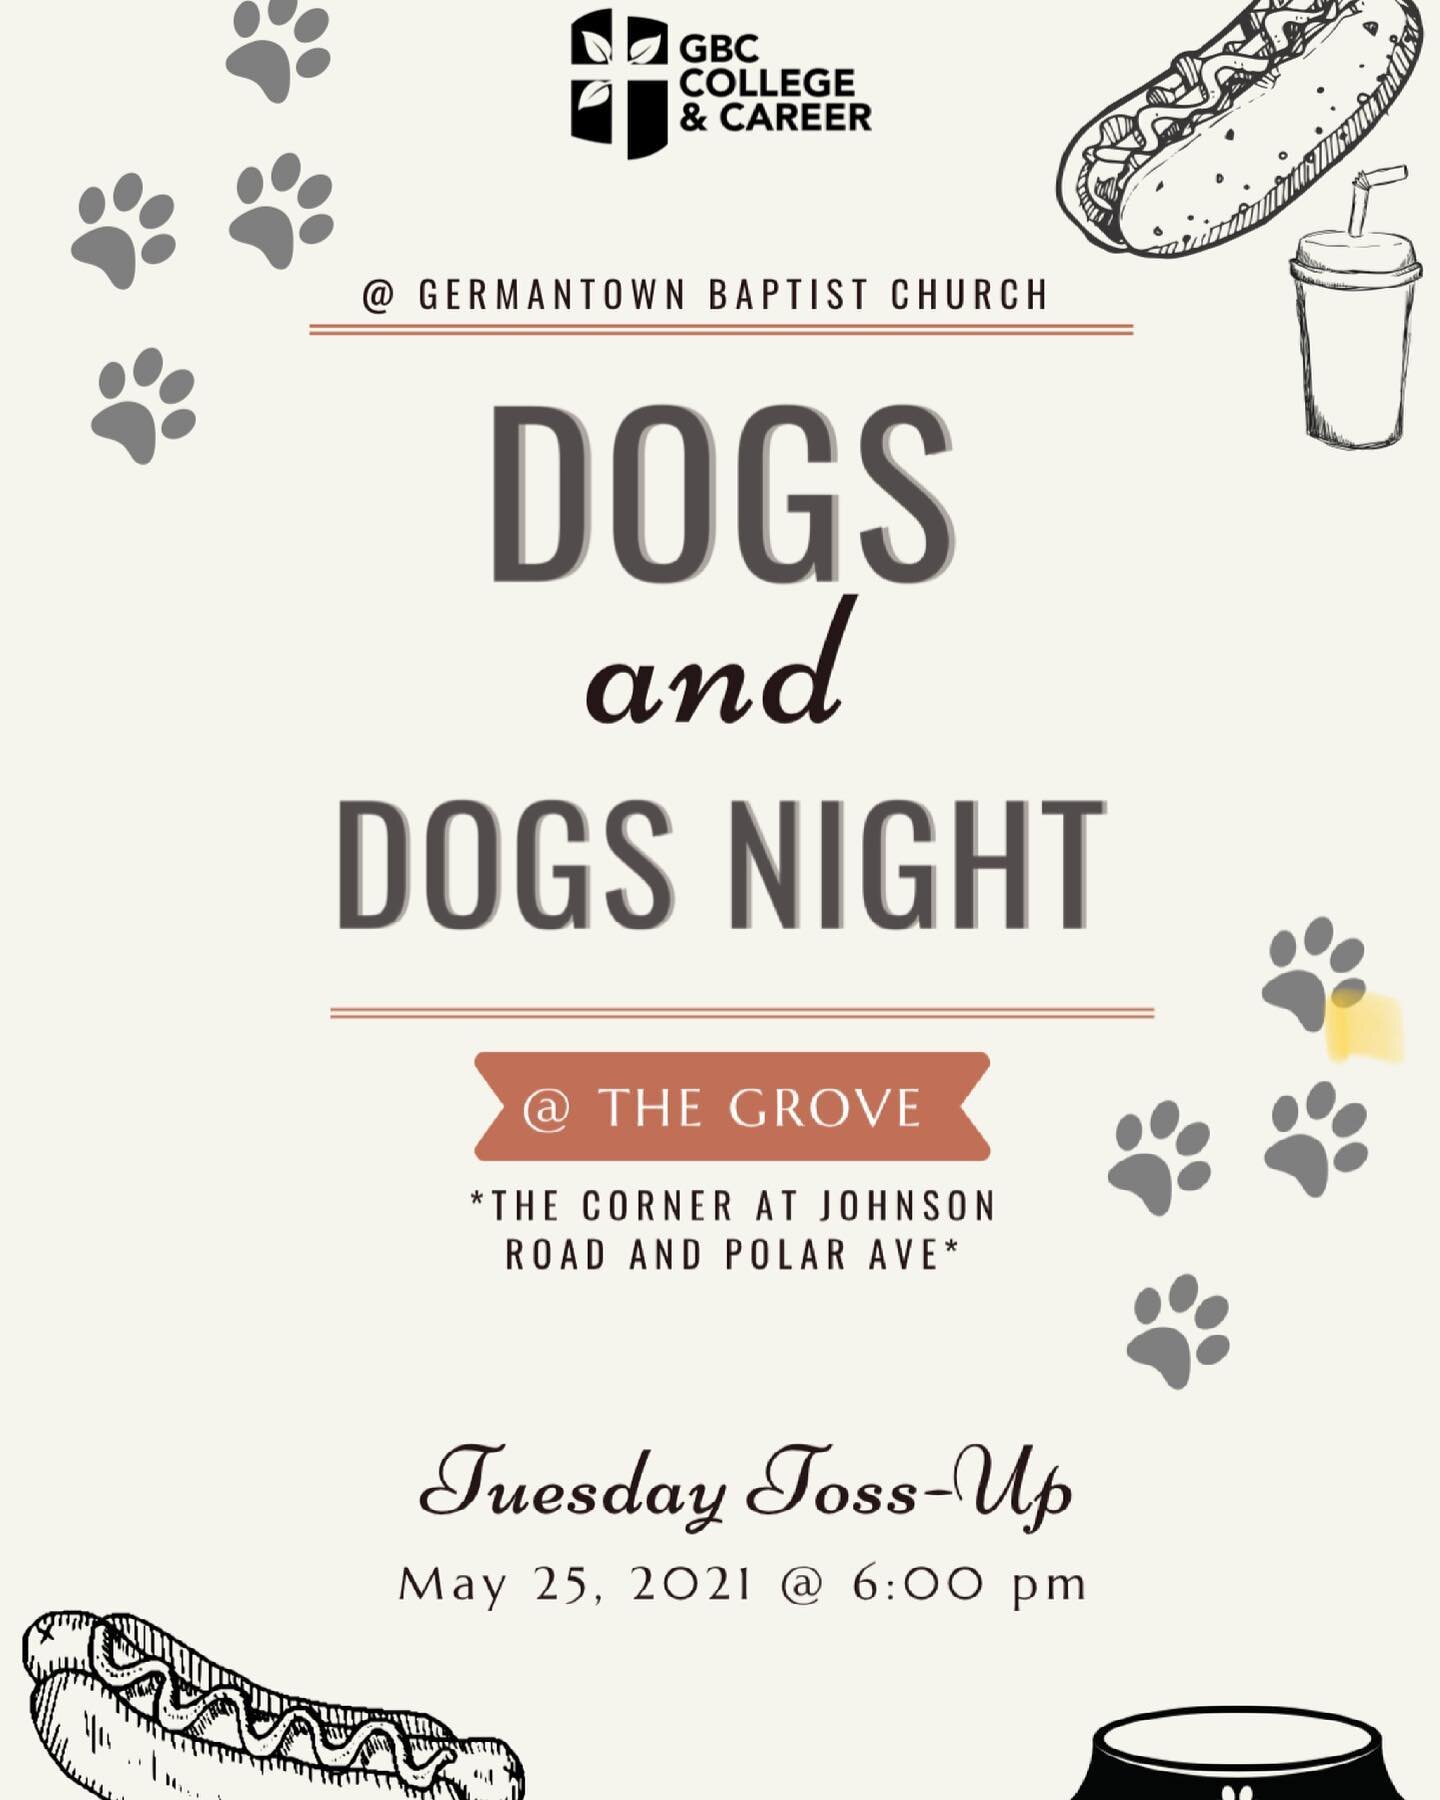 JOIN US FOR TUESDAY TOSS-UP ~TONIGHT~ @ 6 PM! 

Come get free hot dogs and free cuddles from our pups! 

What to bring: 
YOUR DOG! 
Eno/hammock or a lawn chair
Leash for your dog 

We&rsquo;ll provide a hot dog bar and drinks for you and ur pup! Can&